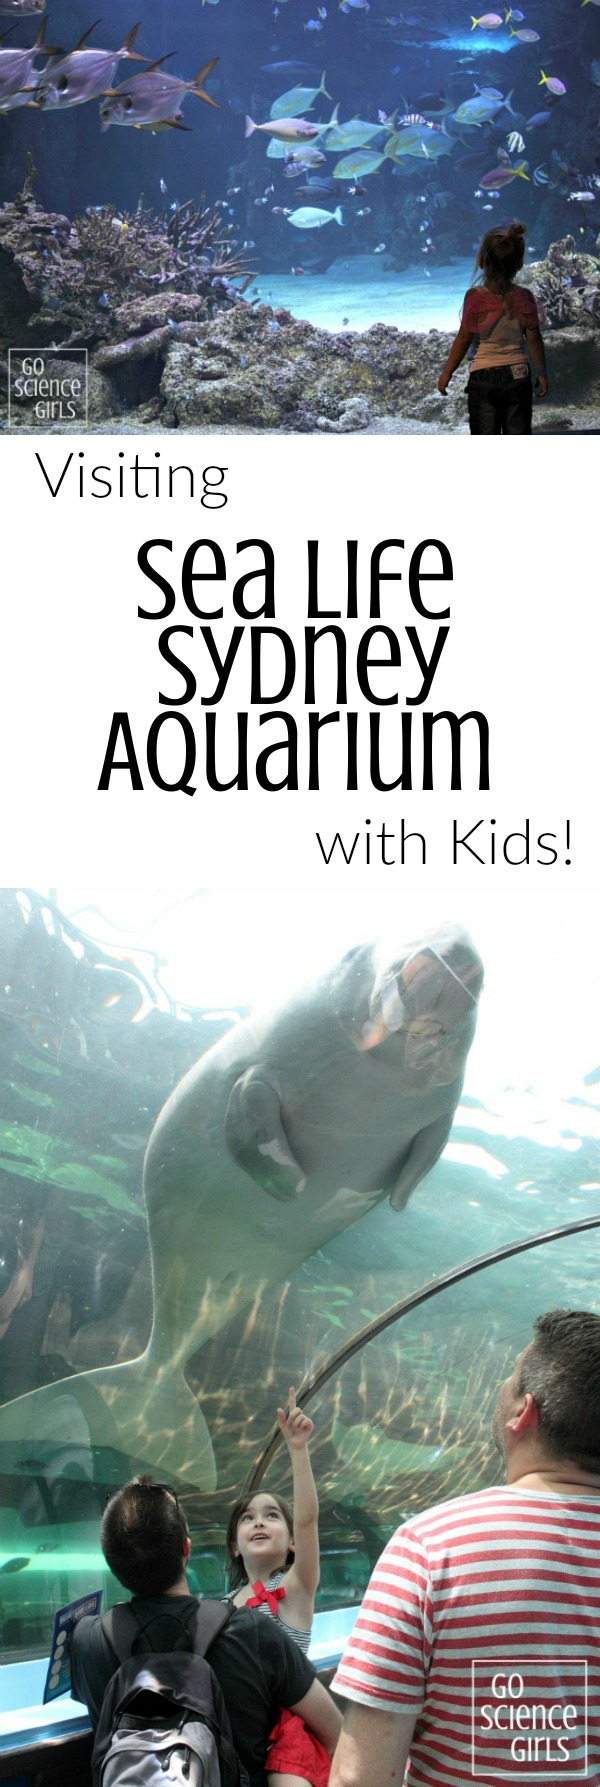 Visiting Sea Life Sydney Aquarium with little kids - how to book, what to expect, how to make the most of your adventure - and the fun science you can experience on the way. A review by Go Science Kids.